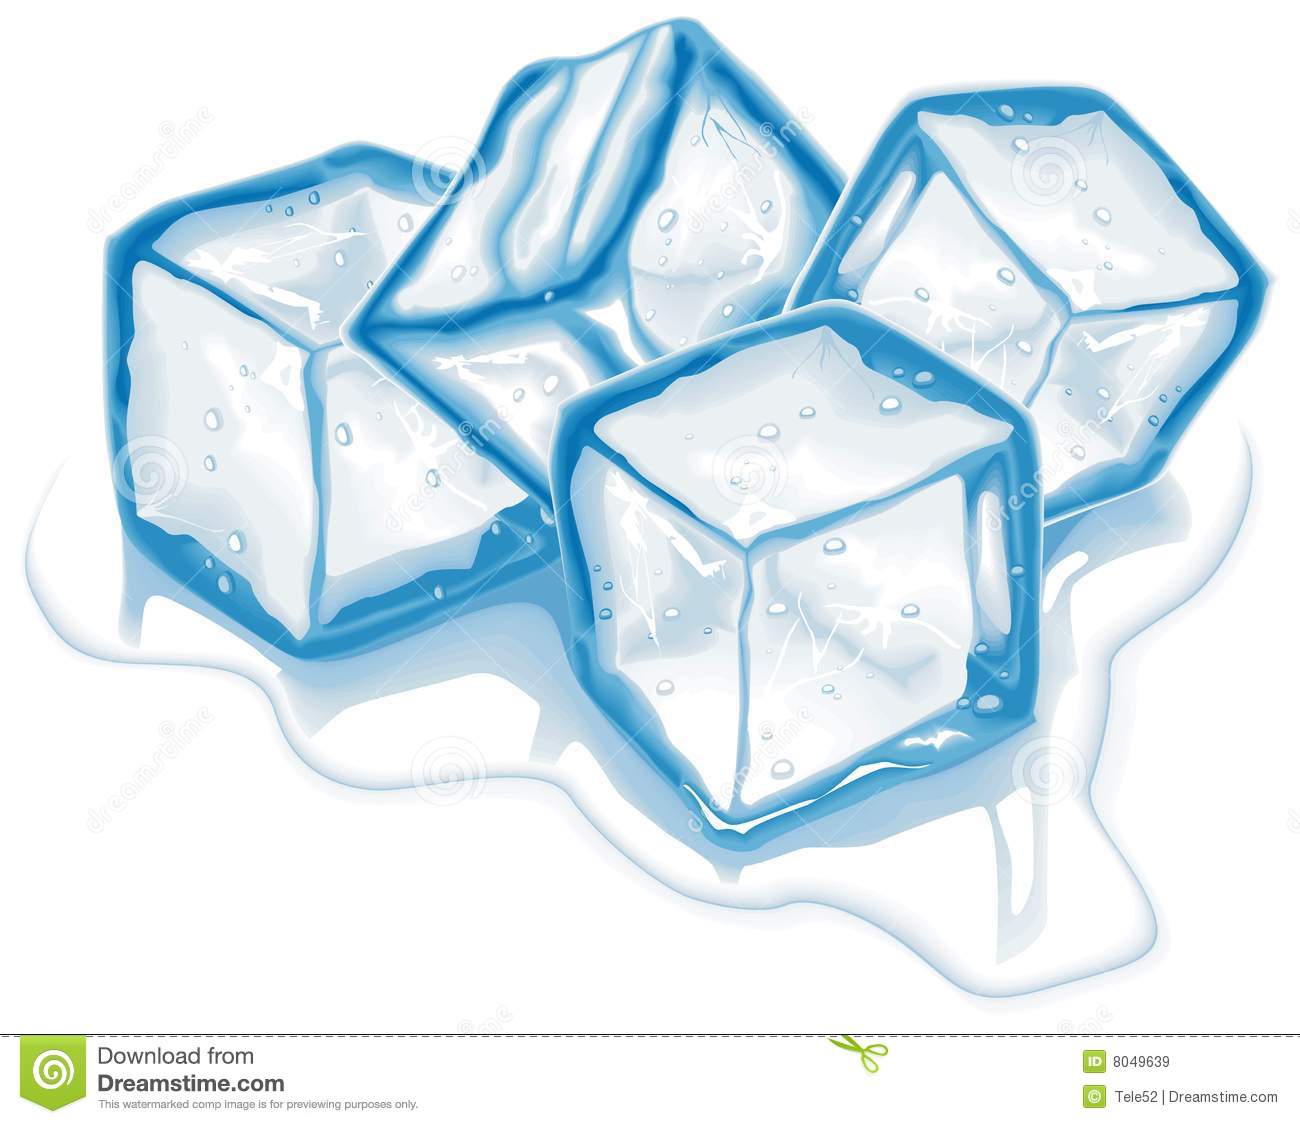 Royalty Free Stock Images Four Vector Ice Cubes